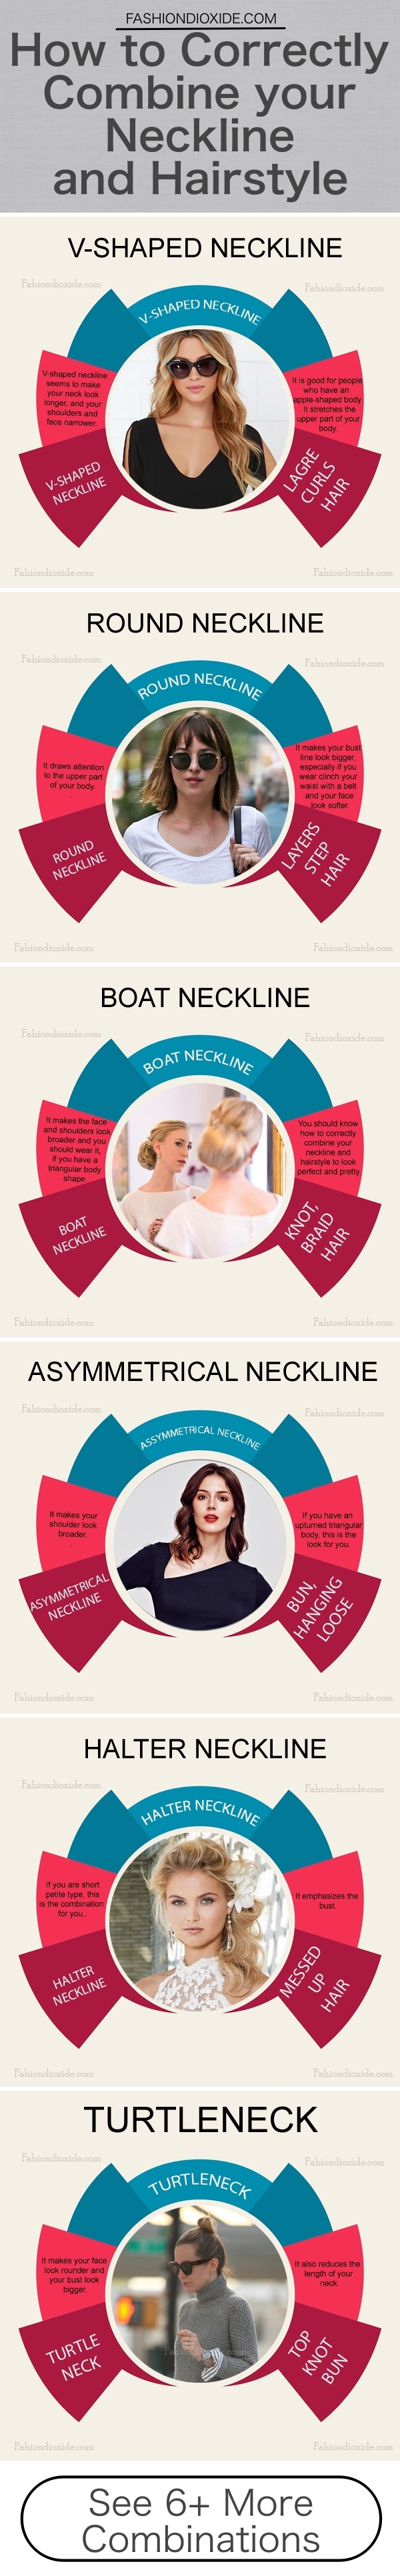 How-To-Correctly-Combine-Your-Neckline-And-Hairstyle